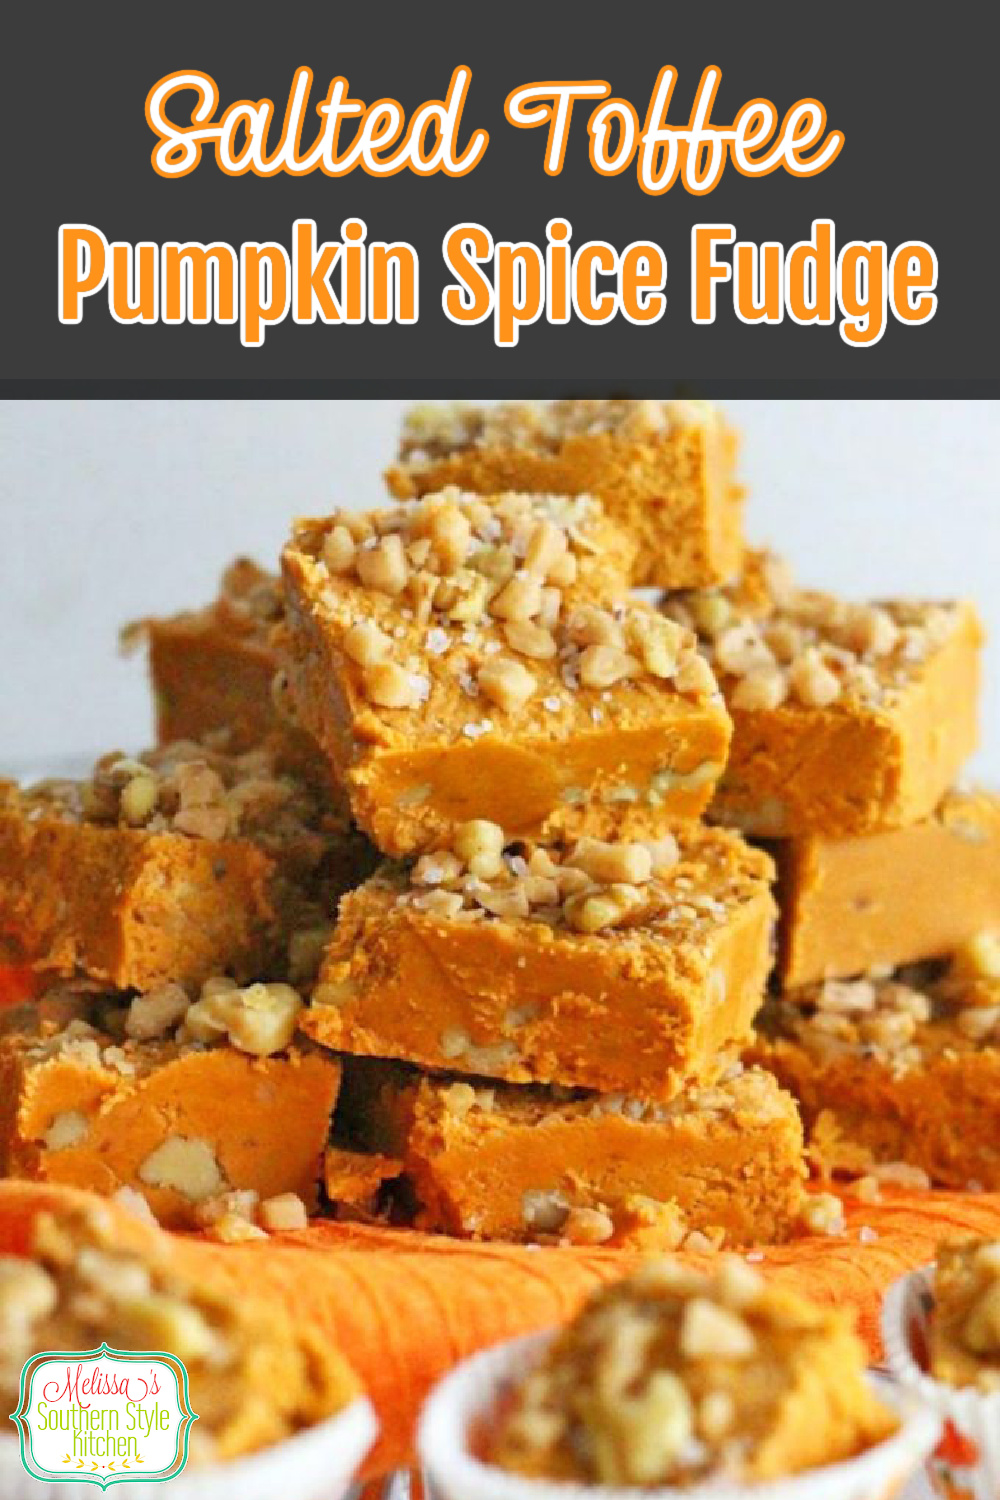 This Salted Toffee Pumpkin Spice Fudge is a seasonal delicacy topped with toffee bits for crunch sea salt to balance the sweet #pumpkinfudge #pumpkinspicefudge #fudgerecipes #pumpkinspice ##falldesserts #sweets #candy #thanksgivingdesserts #southernfood #southernrecipes